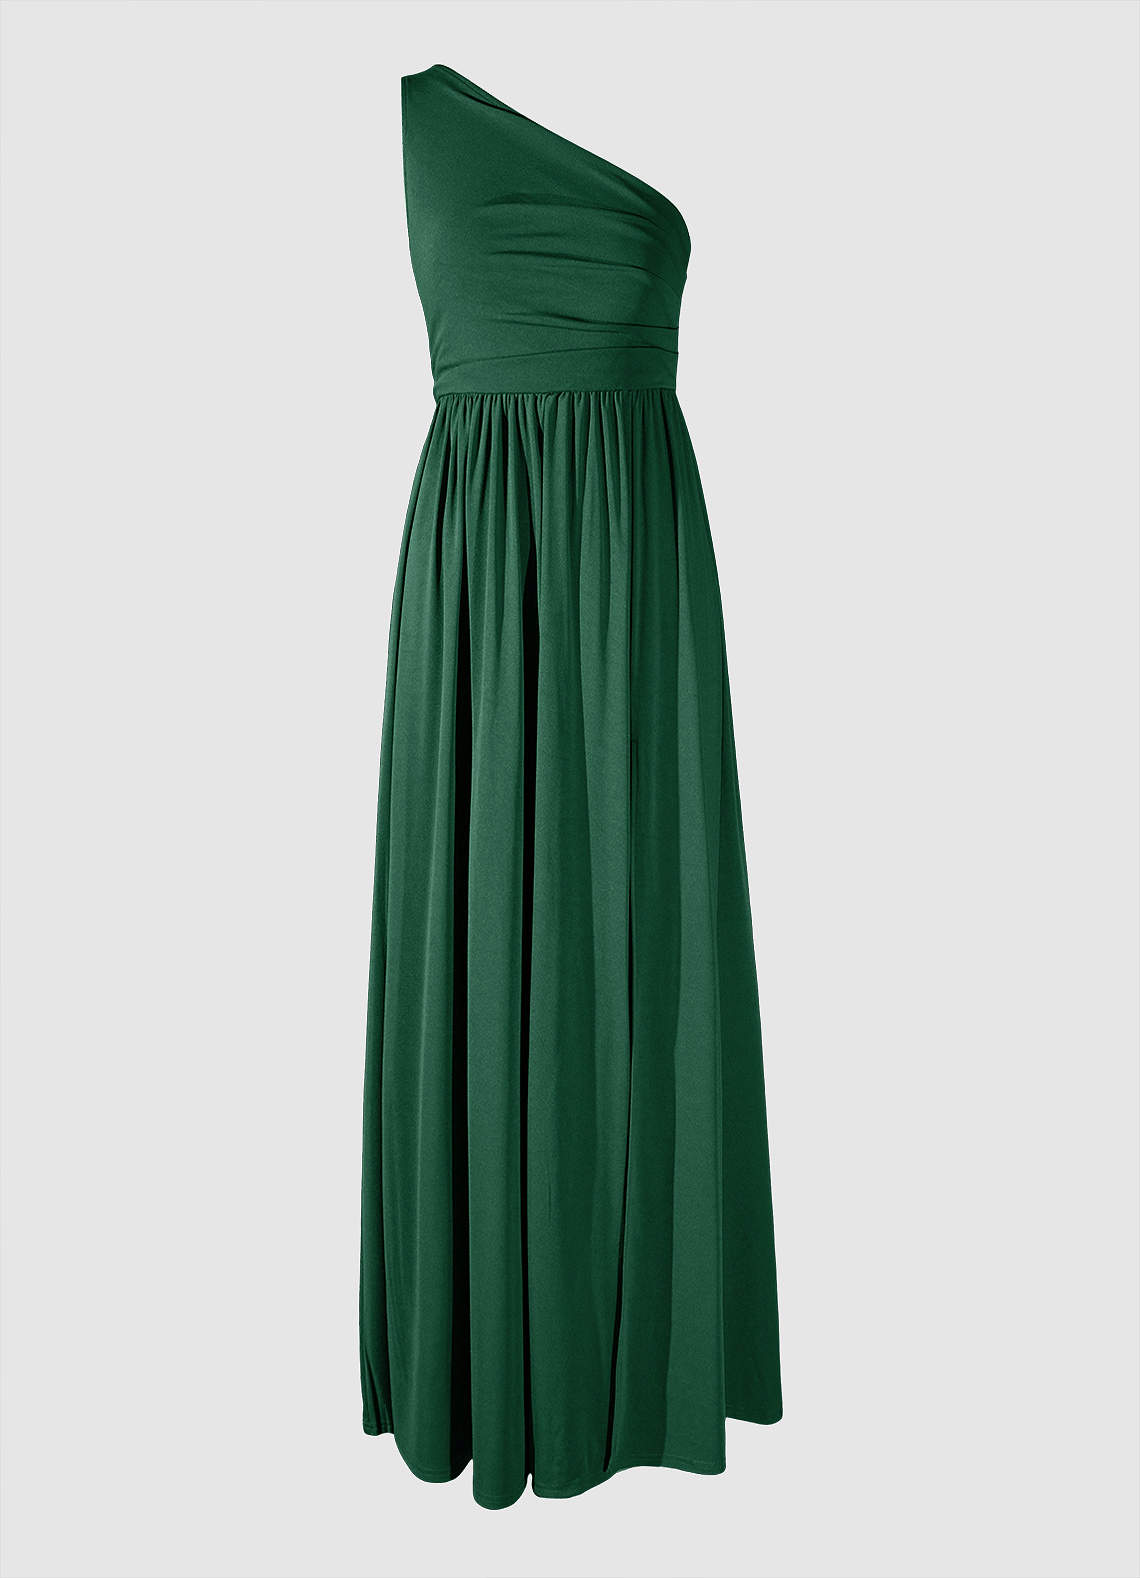 On The Guest List Dark Emerald One-Shoulder Maxi Dress image1